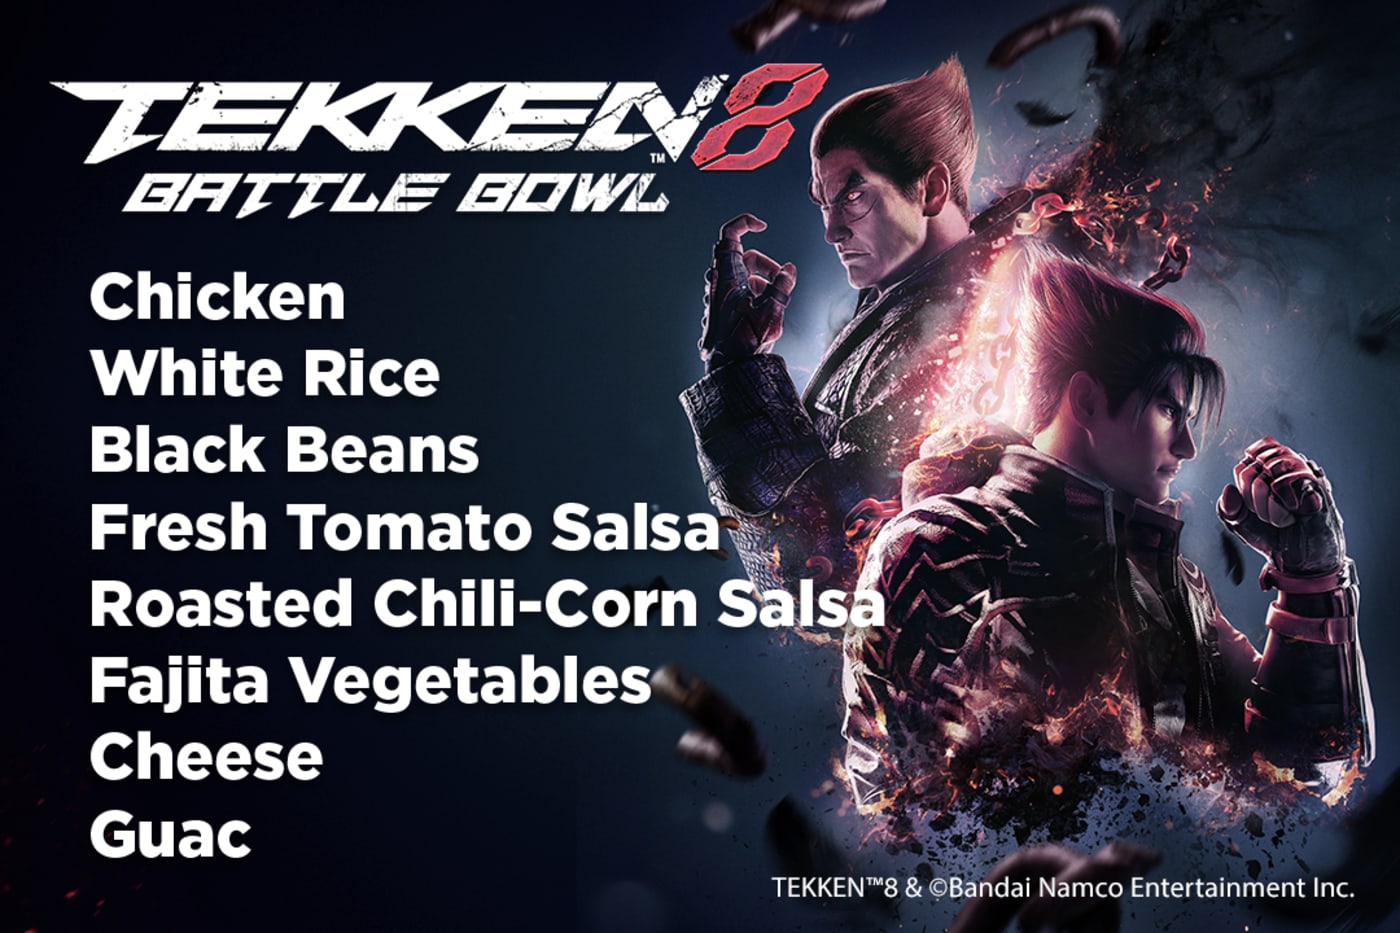 Get free Chipotle chips and guac by playing Tekken 8 on PS5